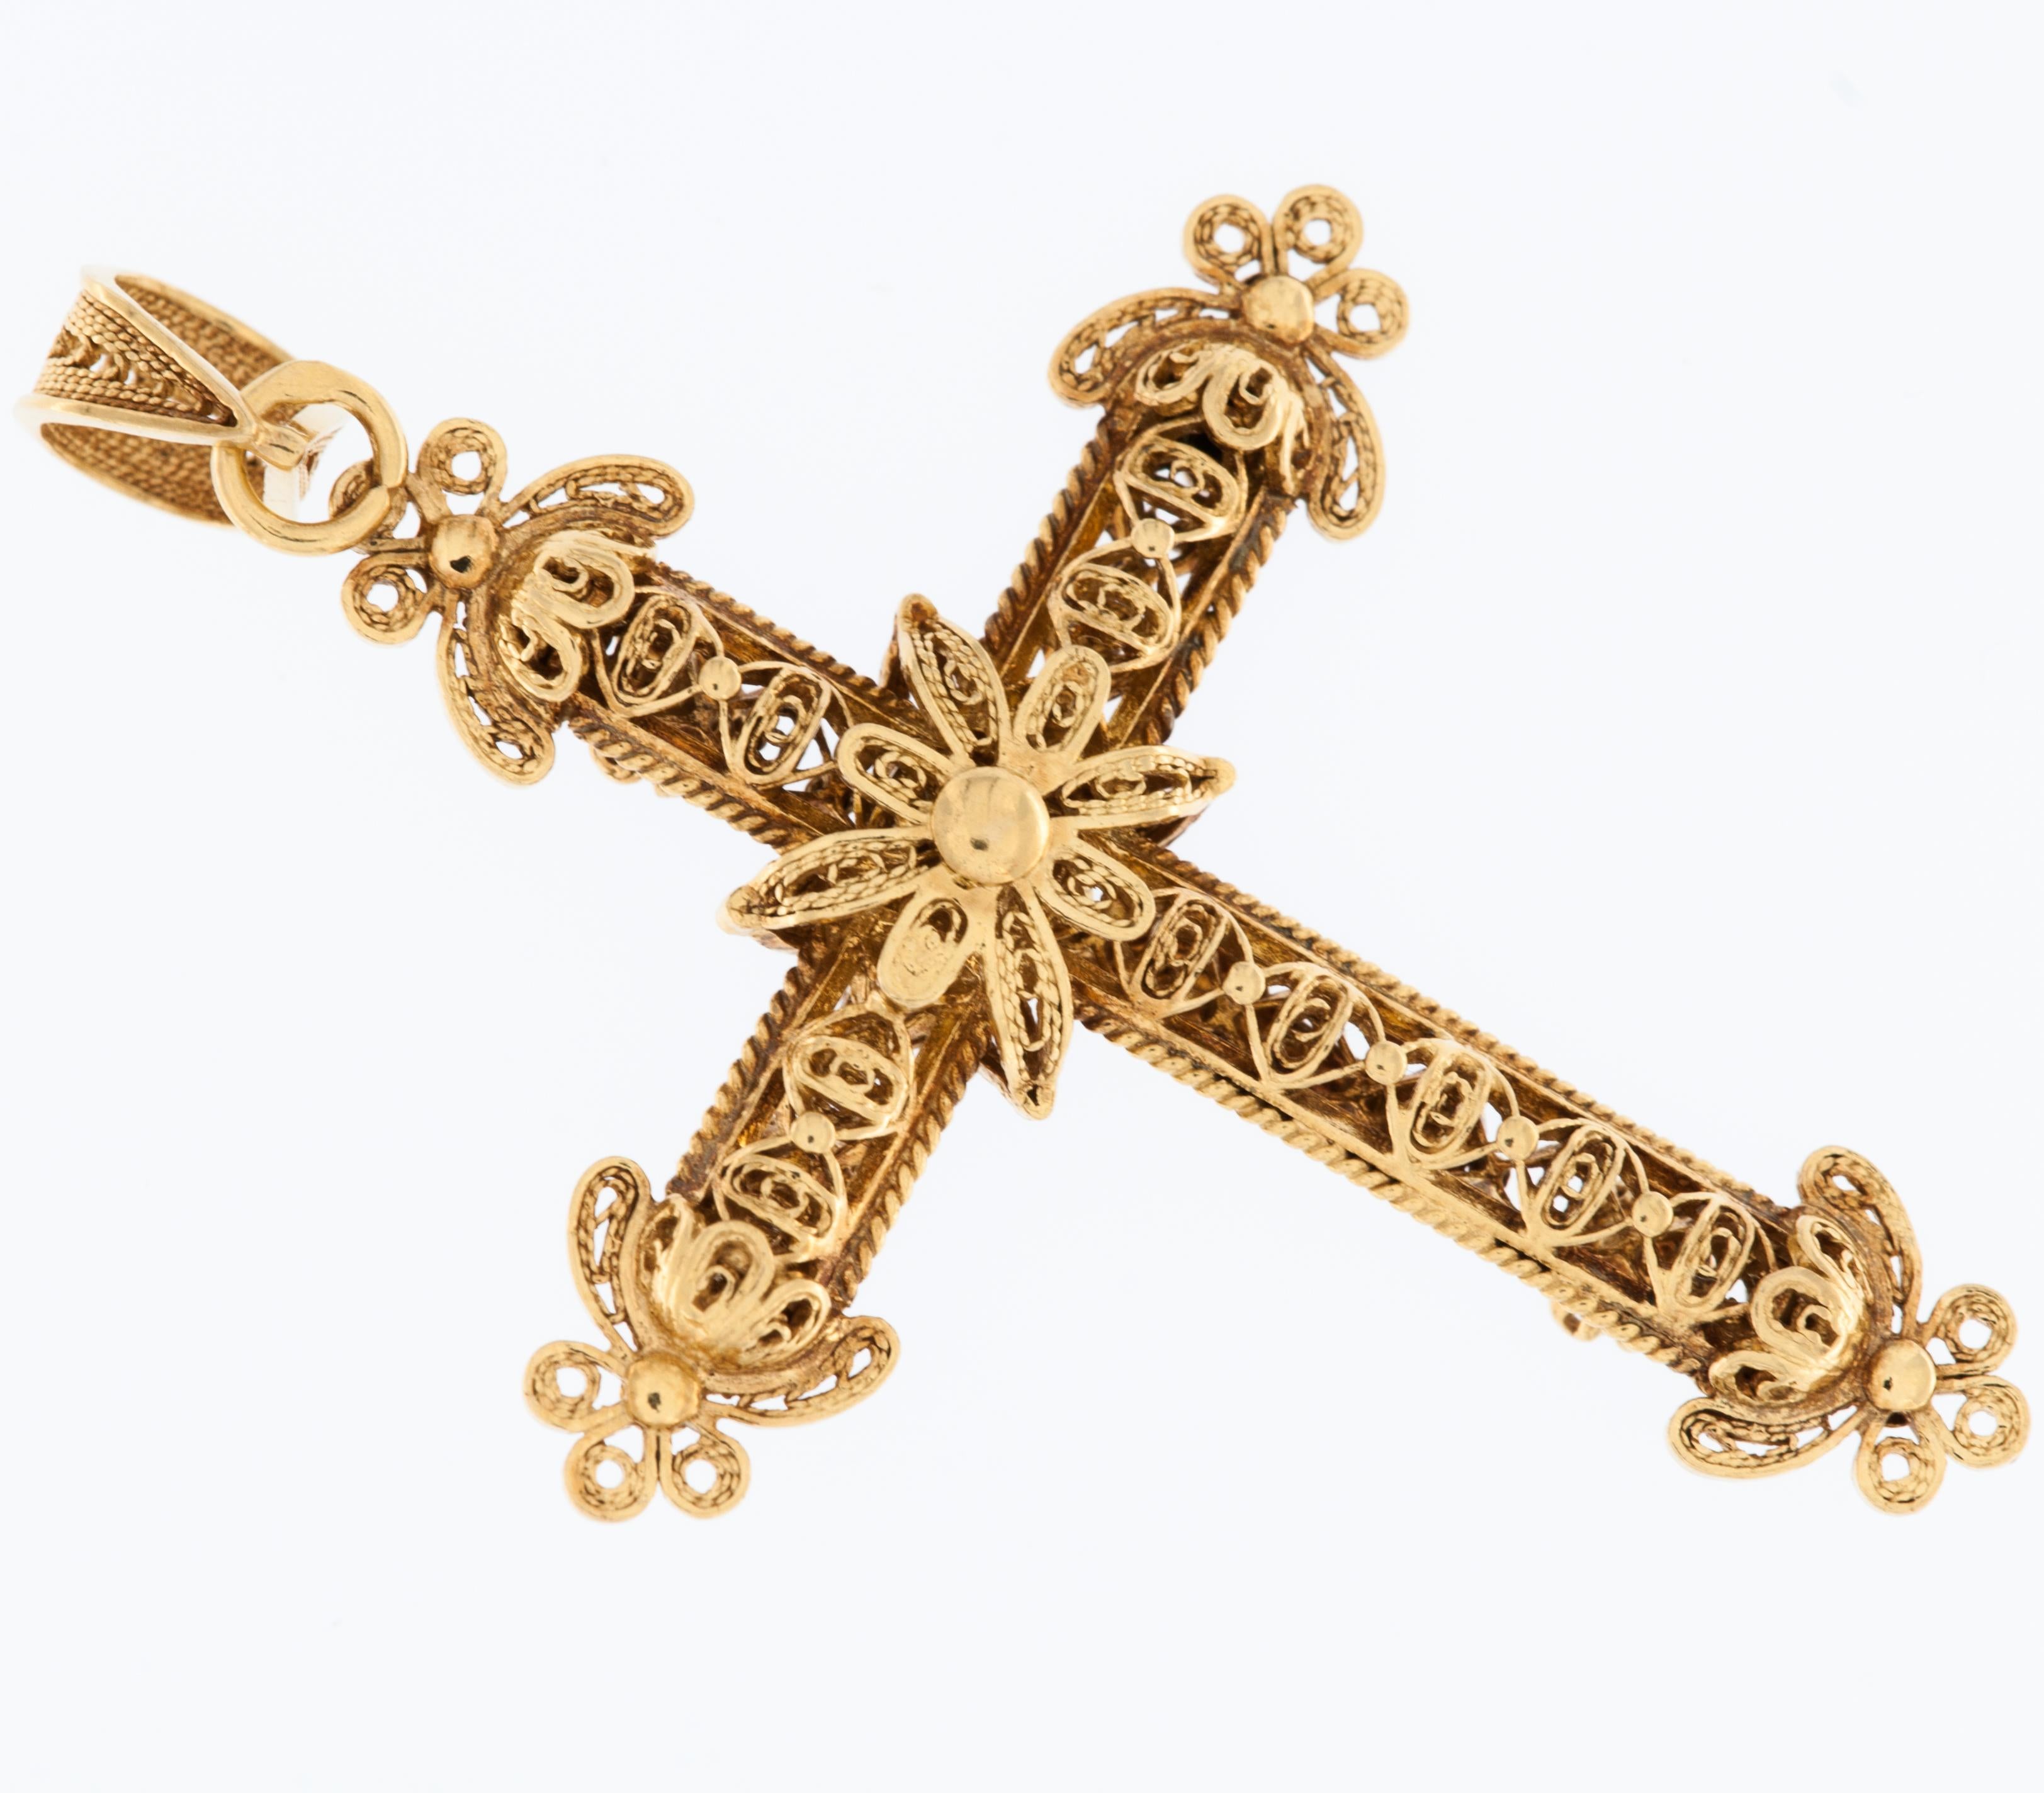 Gorgeous Portuguese crucifix in 19kt yellow gold representing Jesus crucified. The term crucifix refers to a cross with Jesus on it. Sublime work of details on both sides, this pendant is in good condition. On the left side has a missing small